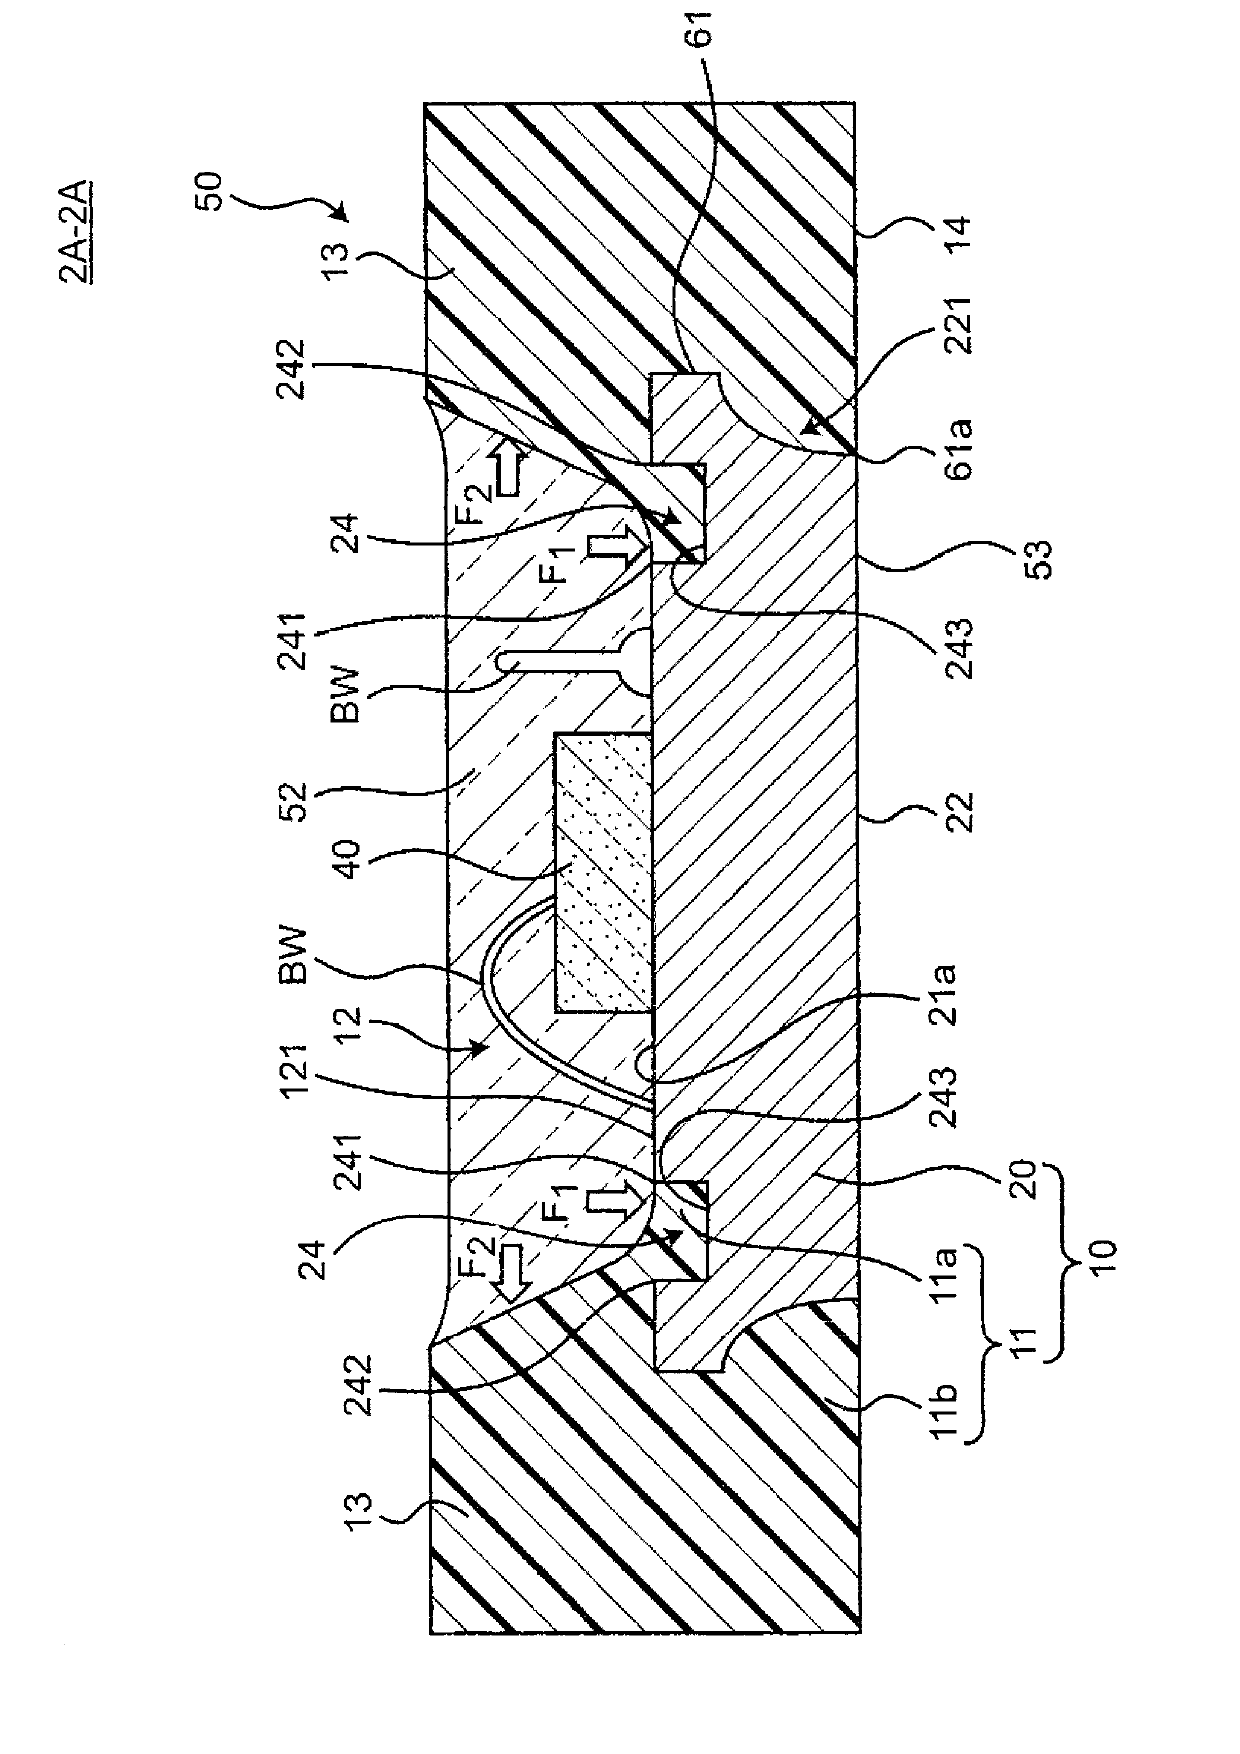 Molded package and light emitting device